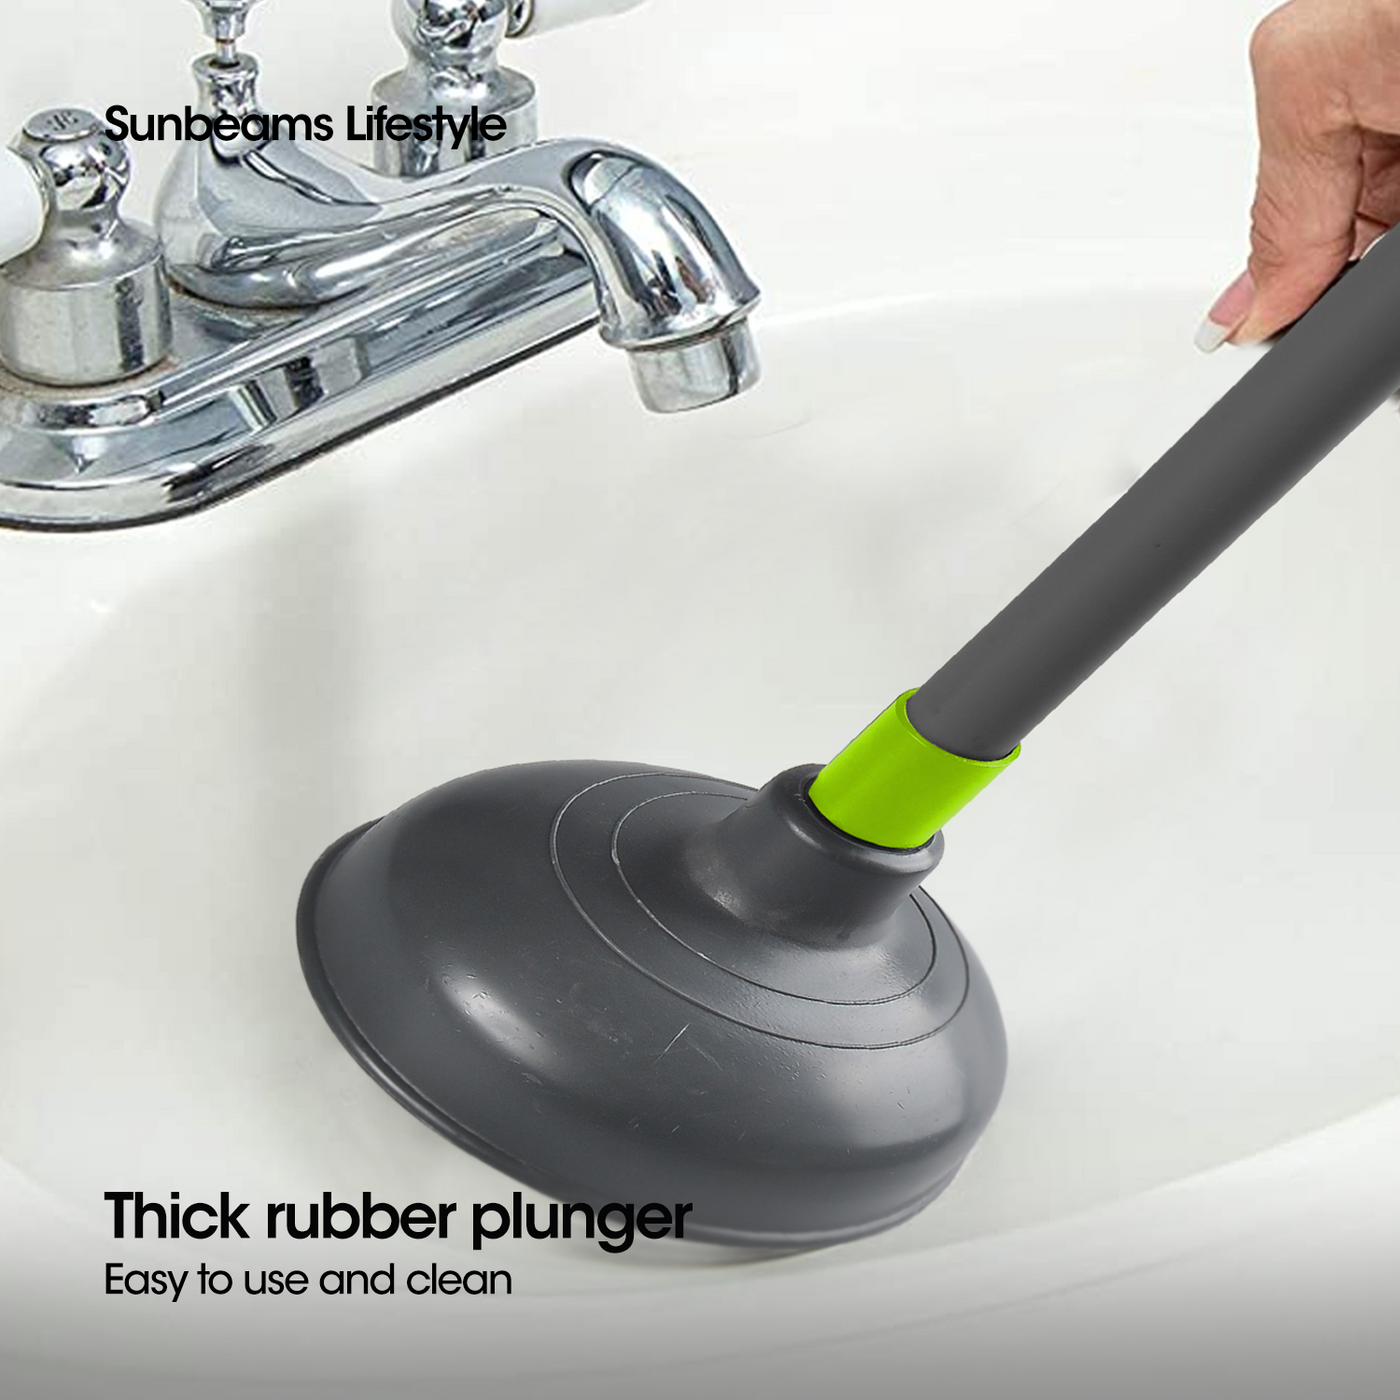 SCRUBZ Premium Sink Plunger Cleaning Material 13.5 x 13.5 x 50 cm Made of PVA